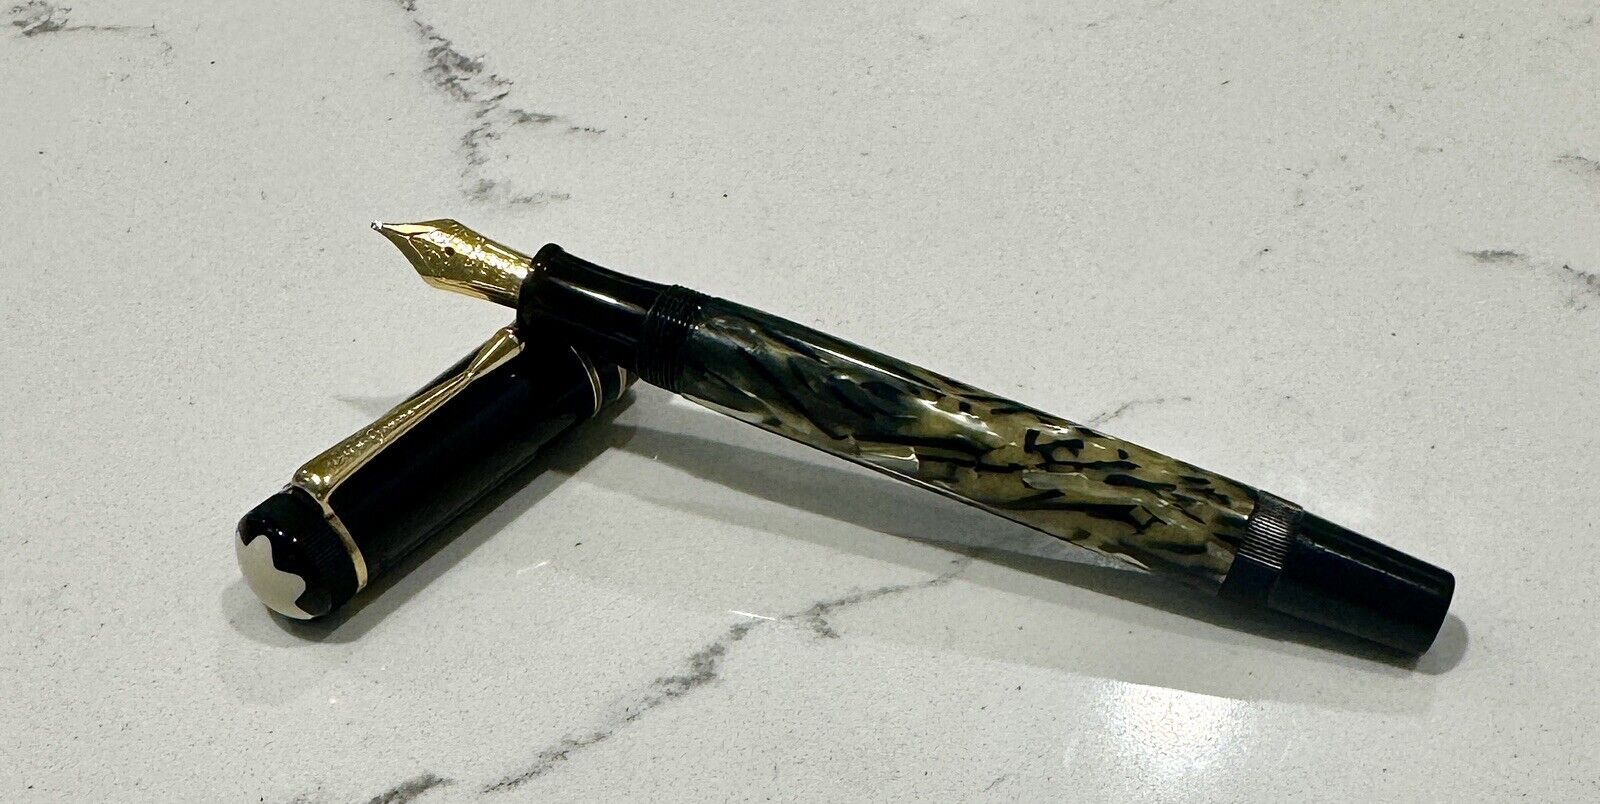 1994 MONTBLANC OSCAR WILDE WRITER'S SERIES LIMITED EDITION FOUNTAIN PEN